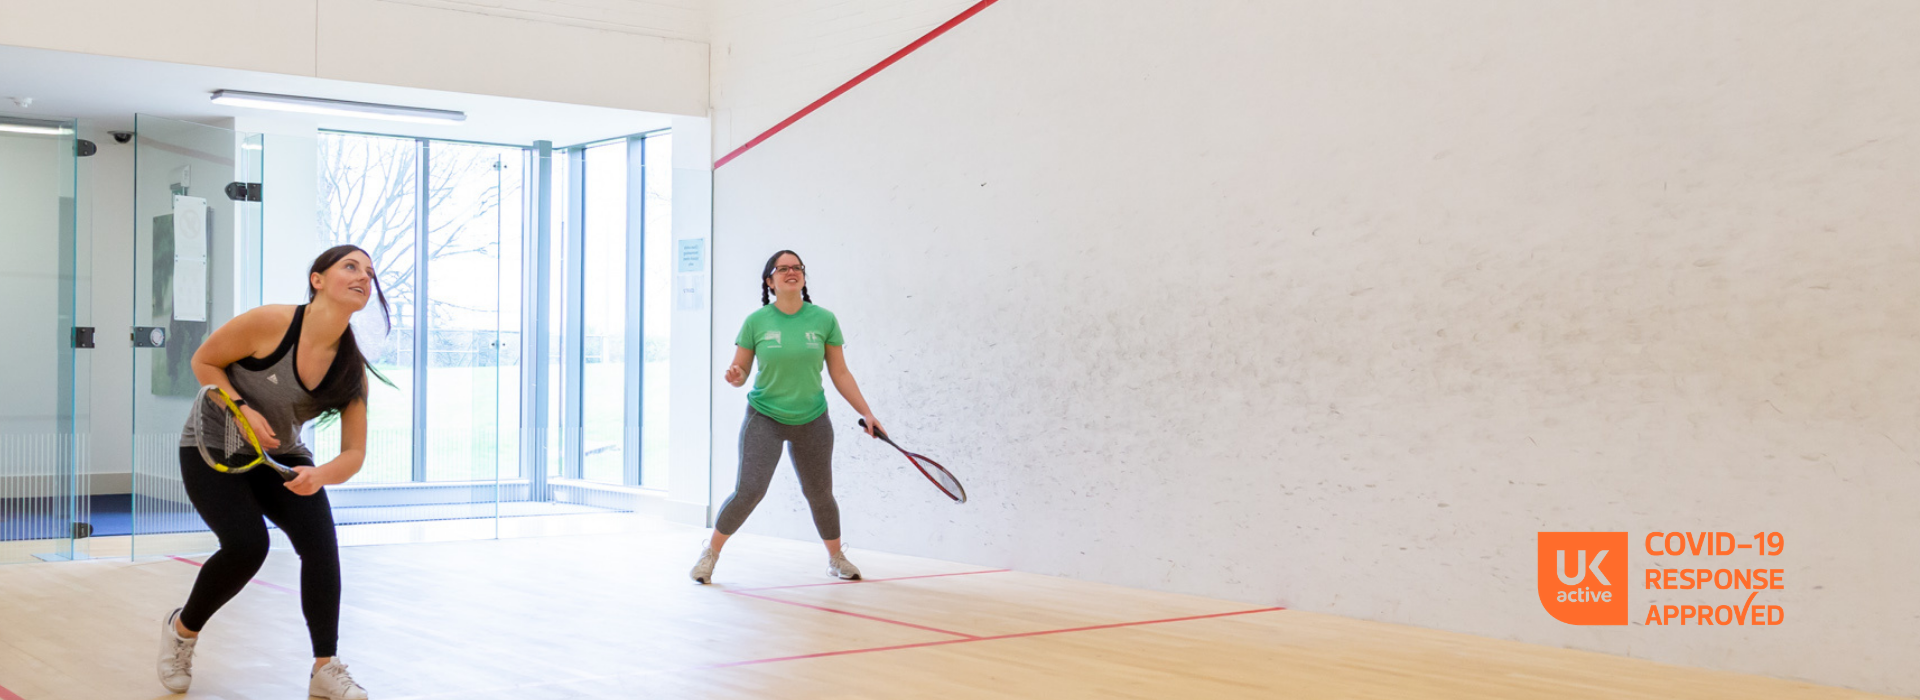 two girls on squash courts